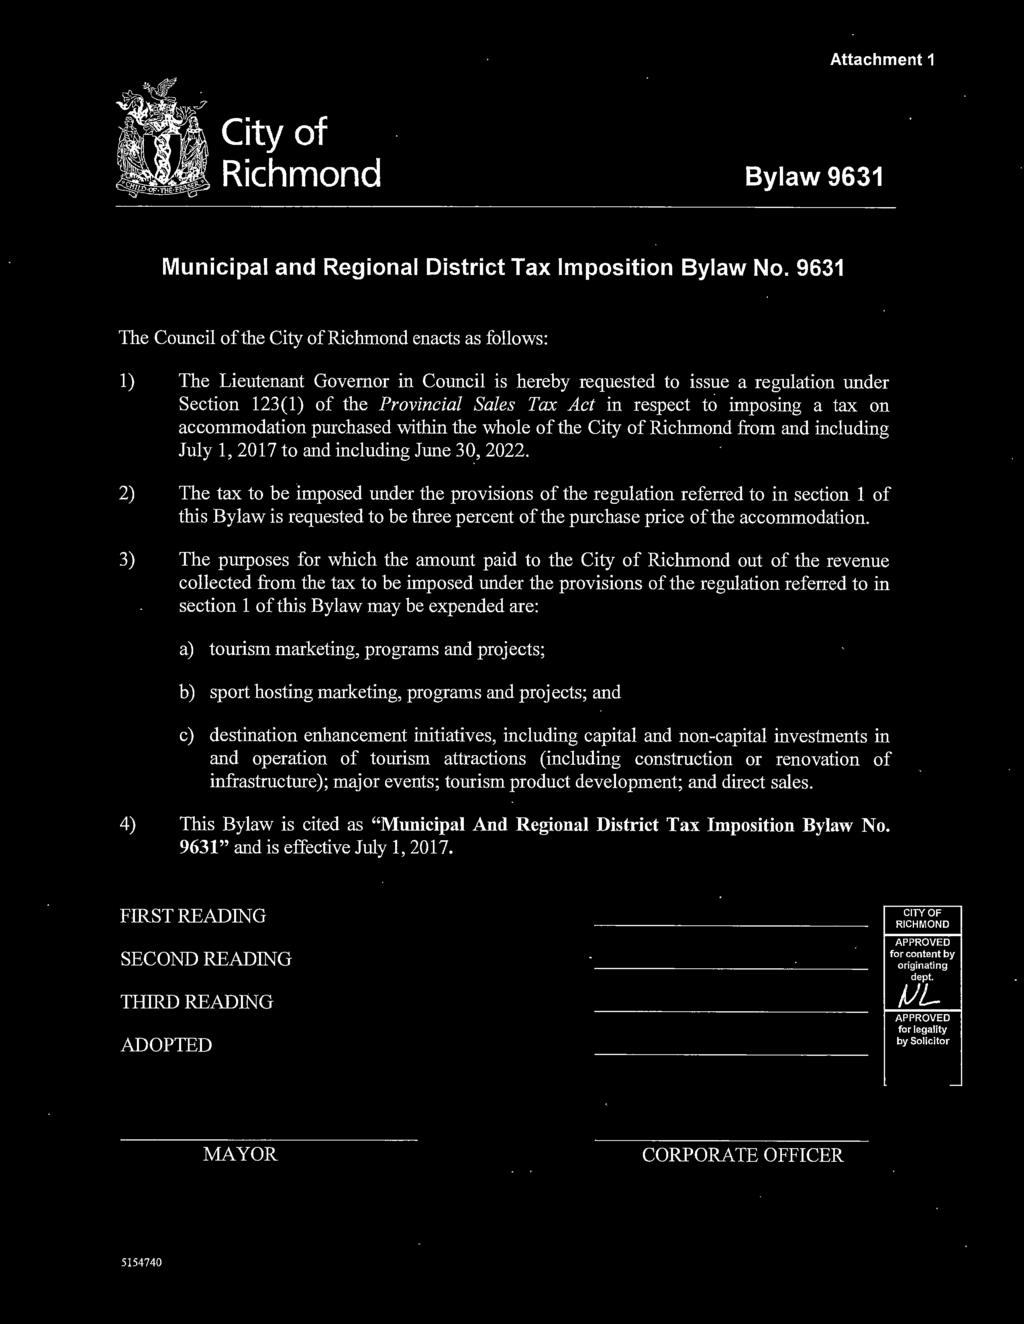 respect to imposing a tax on accommodation purchased within the whole of the City of Richmond from and including July 1, 2017 to and including June 30, 2022.